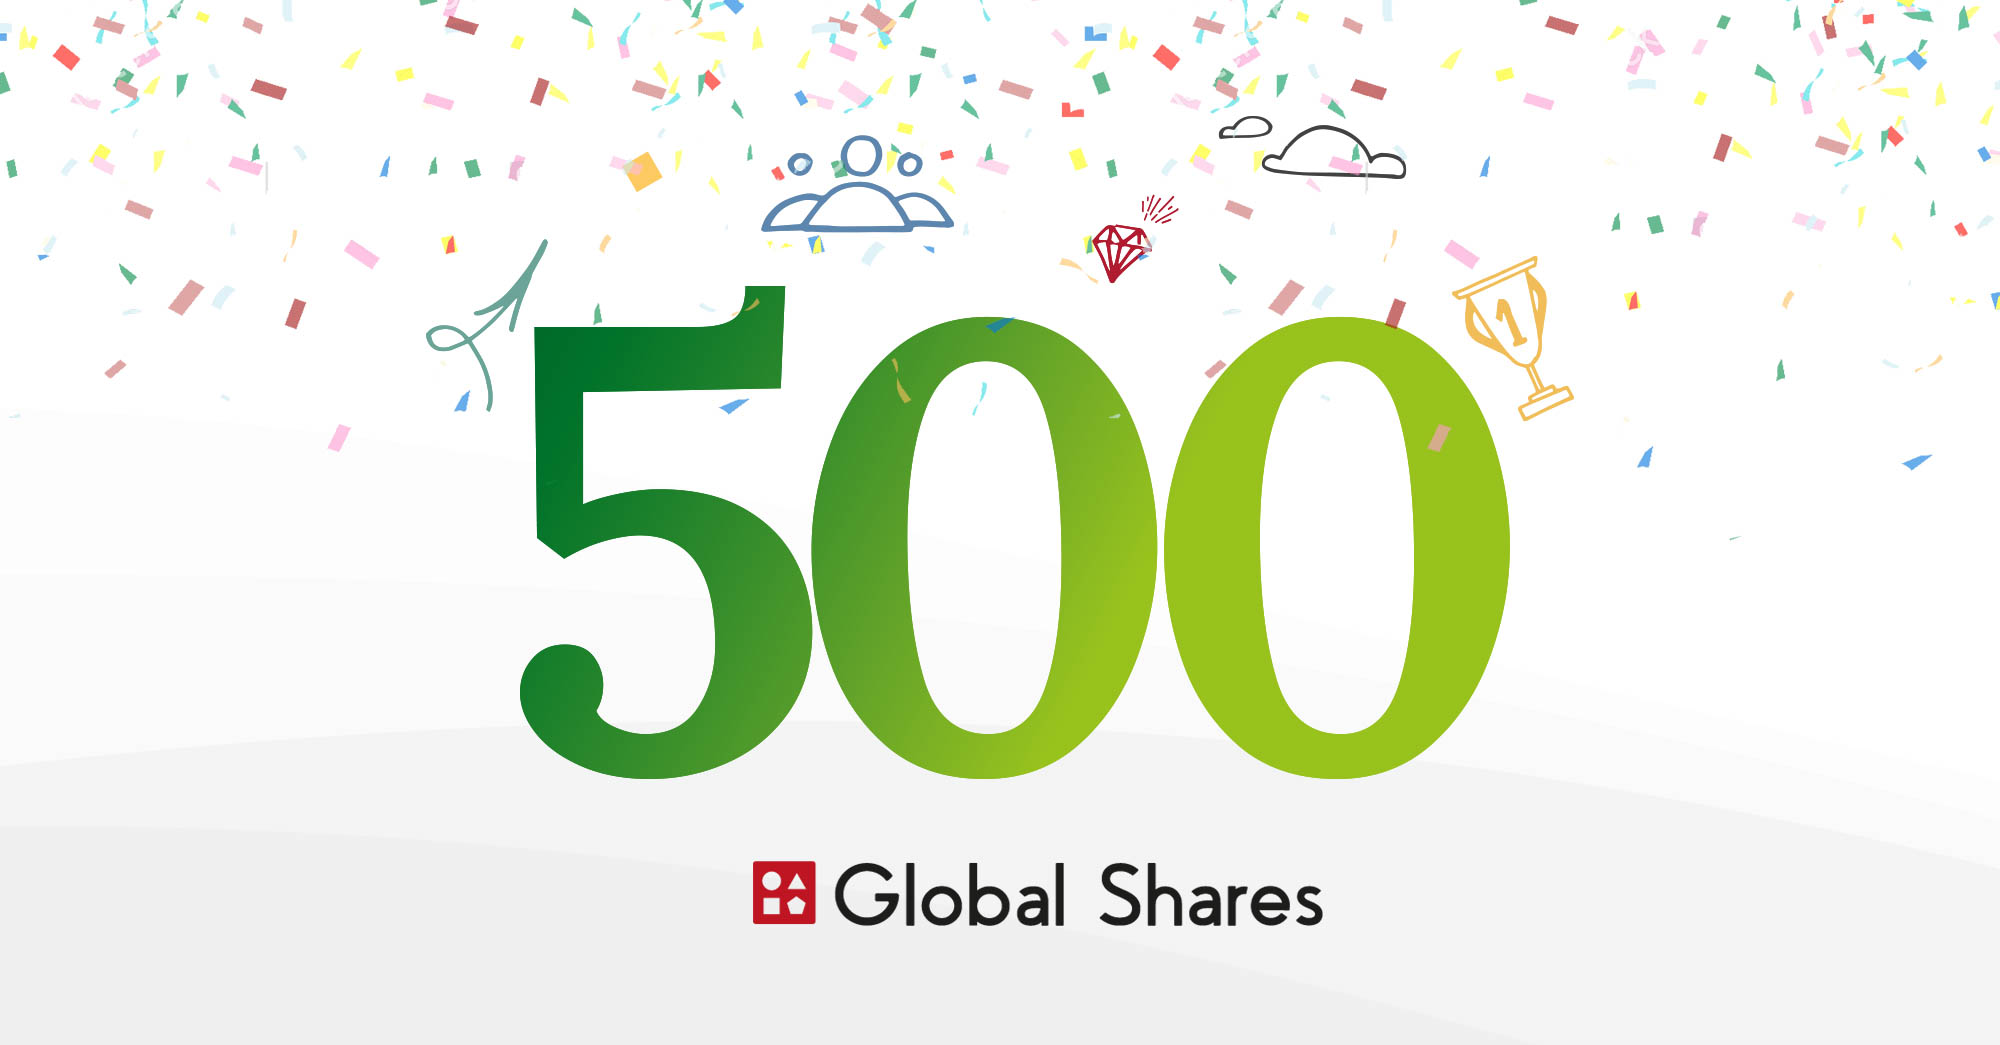 We’ve reached 500 employees!